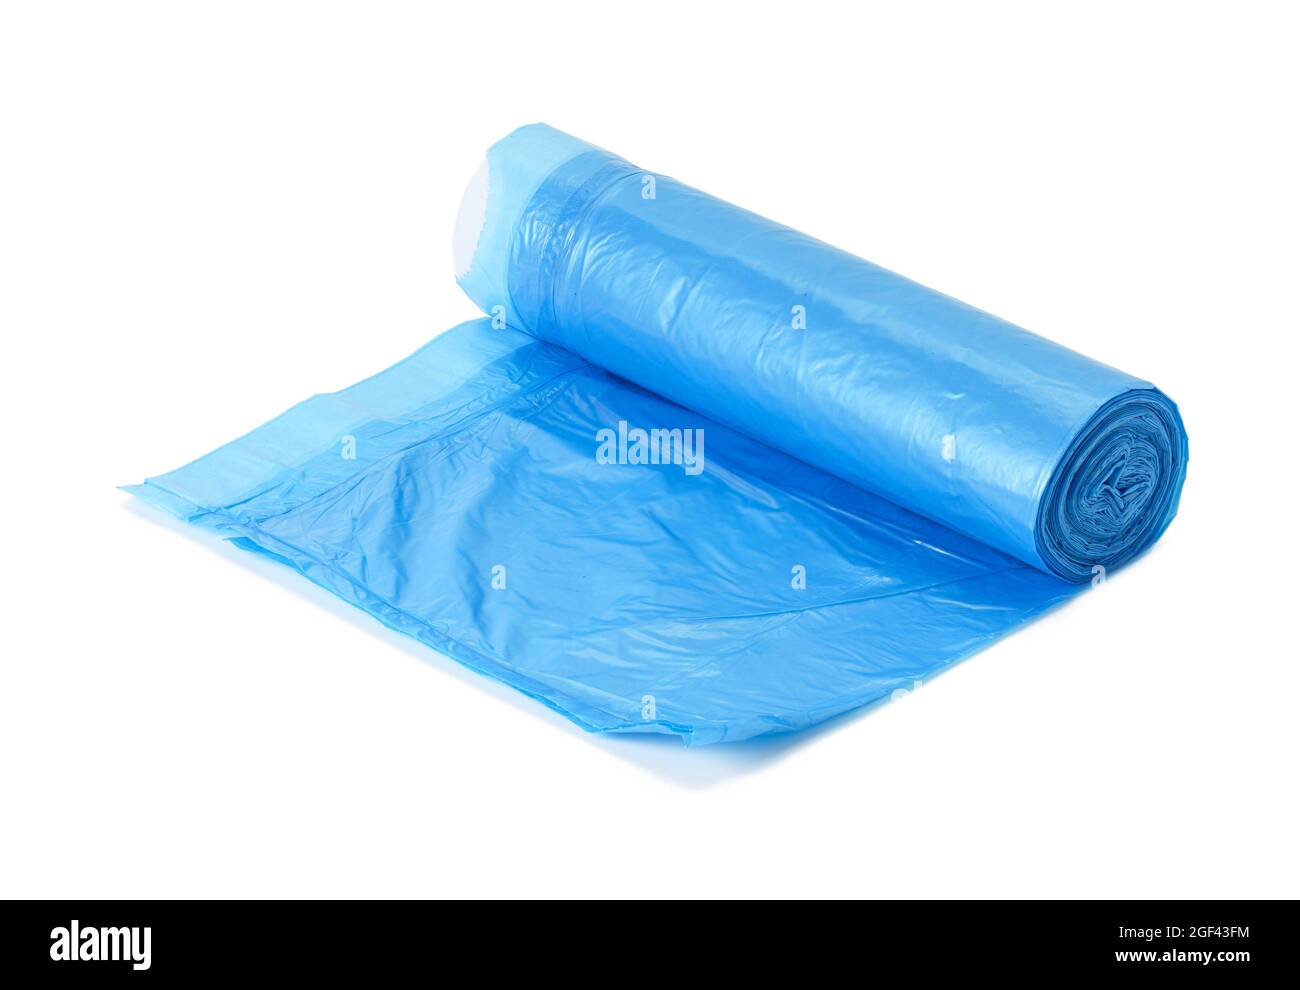 https://c8.alamy.com/comp/2GF43FM/blue-plastic-trash-bags-with-strings-isolated-on-white-background-close-up-2GF43FM.jpg